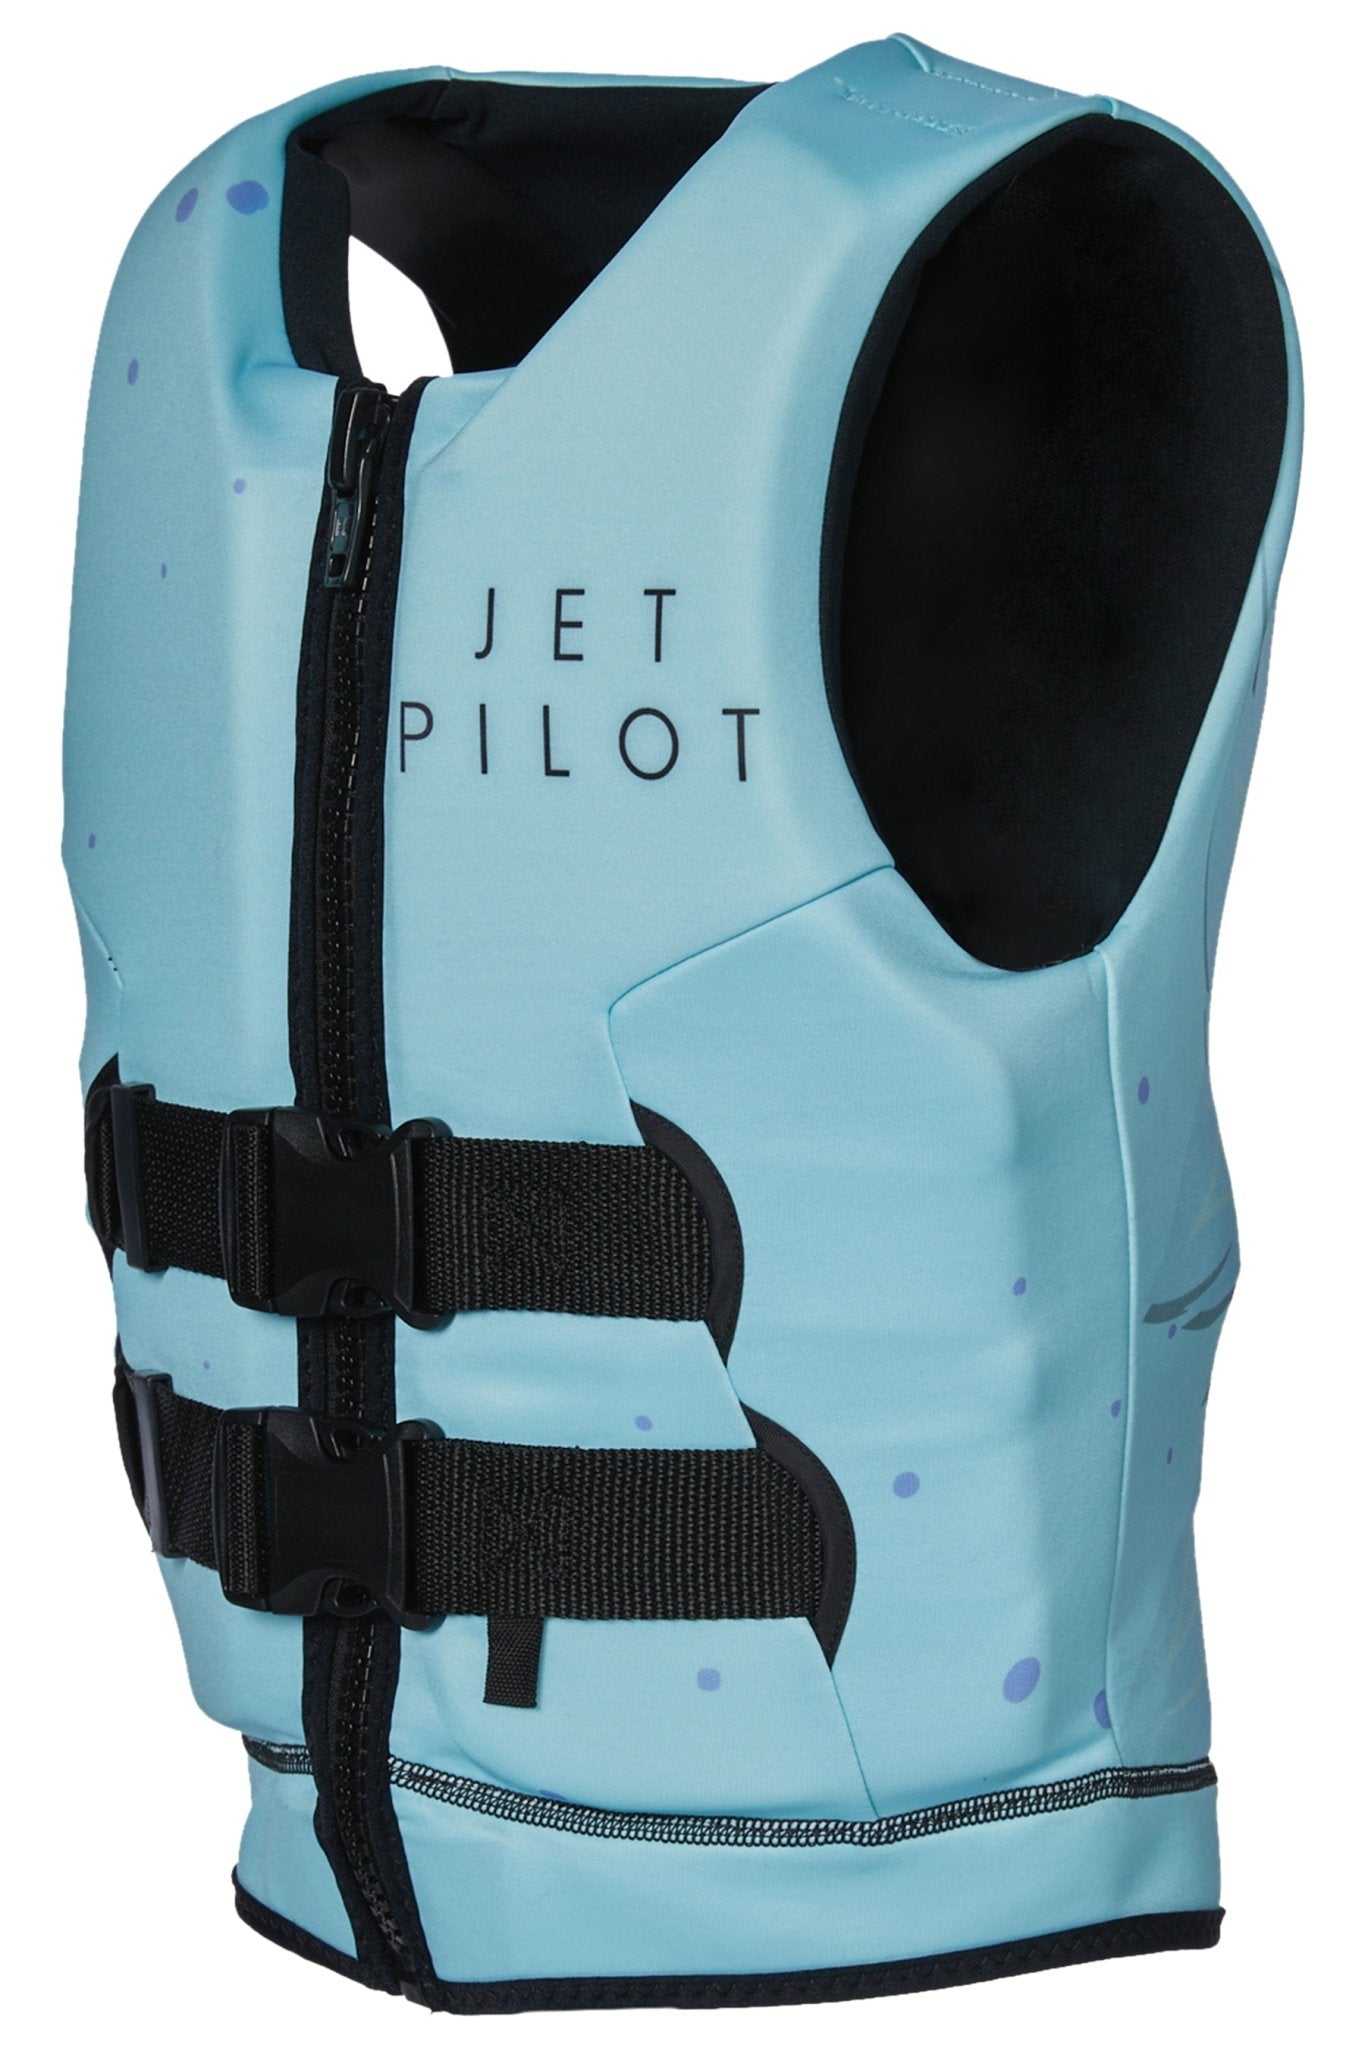 GIRLS WINGS YOUTH CAUSE NEO -Jet PilotJA22211G-Blue-3to4